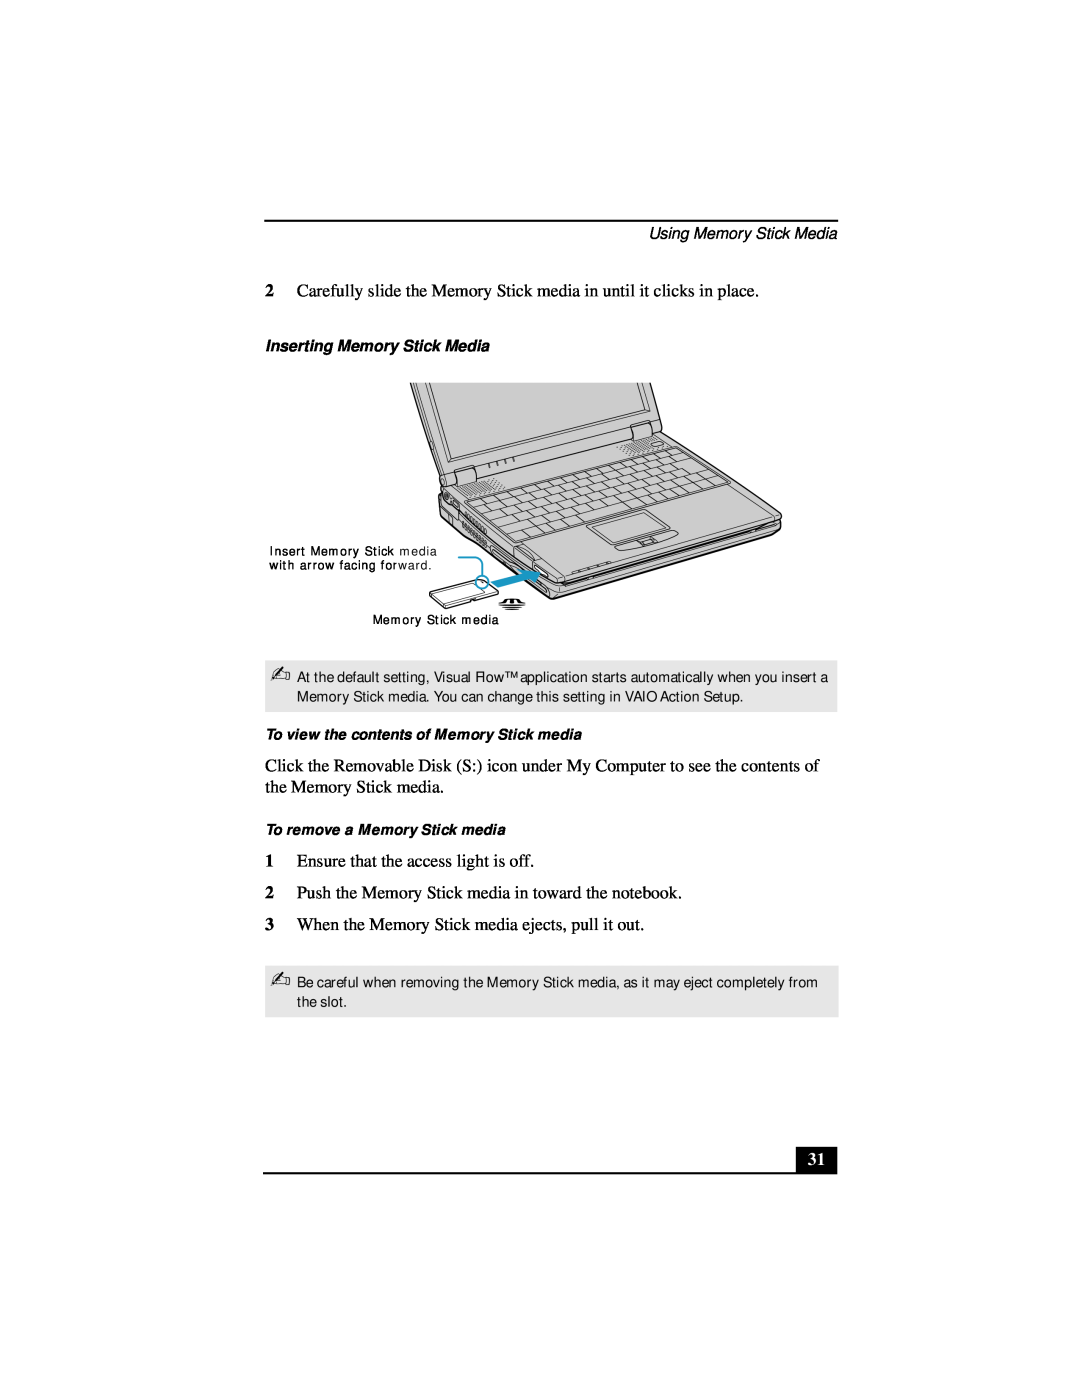 Sony Notebook Computer manual To view the contents of Memory Stick media, To remove a Memory Stick media 